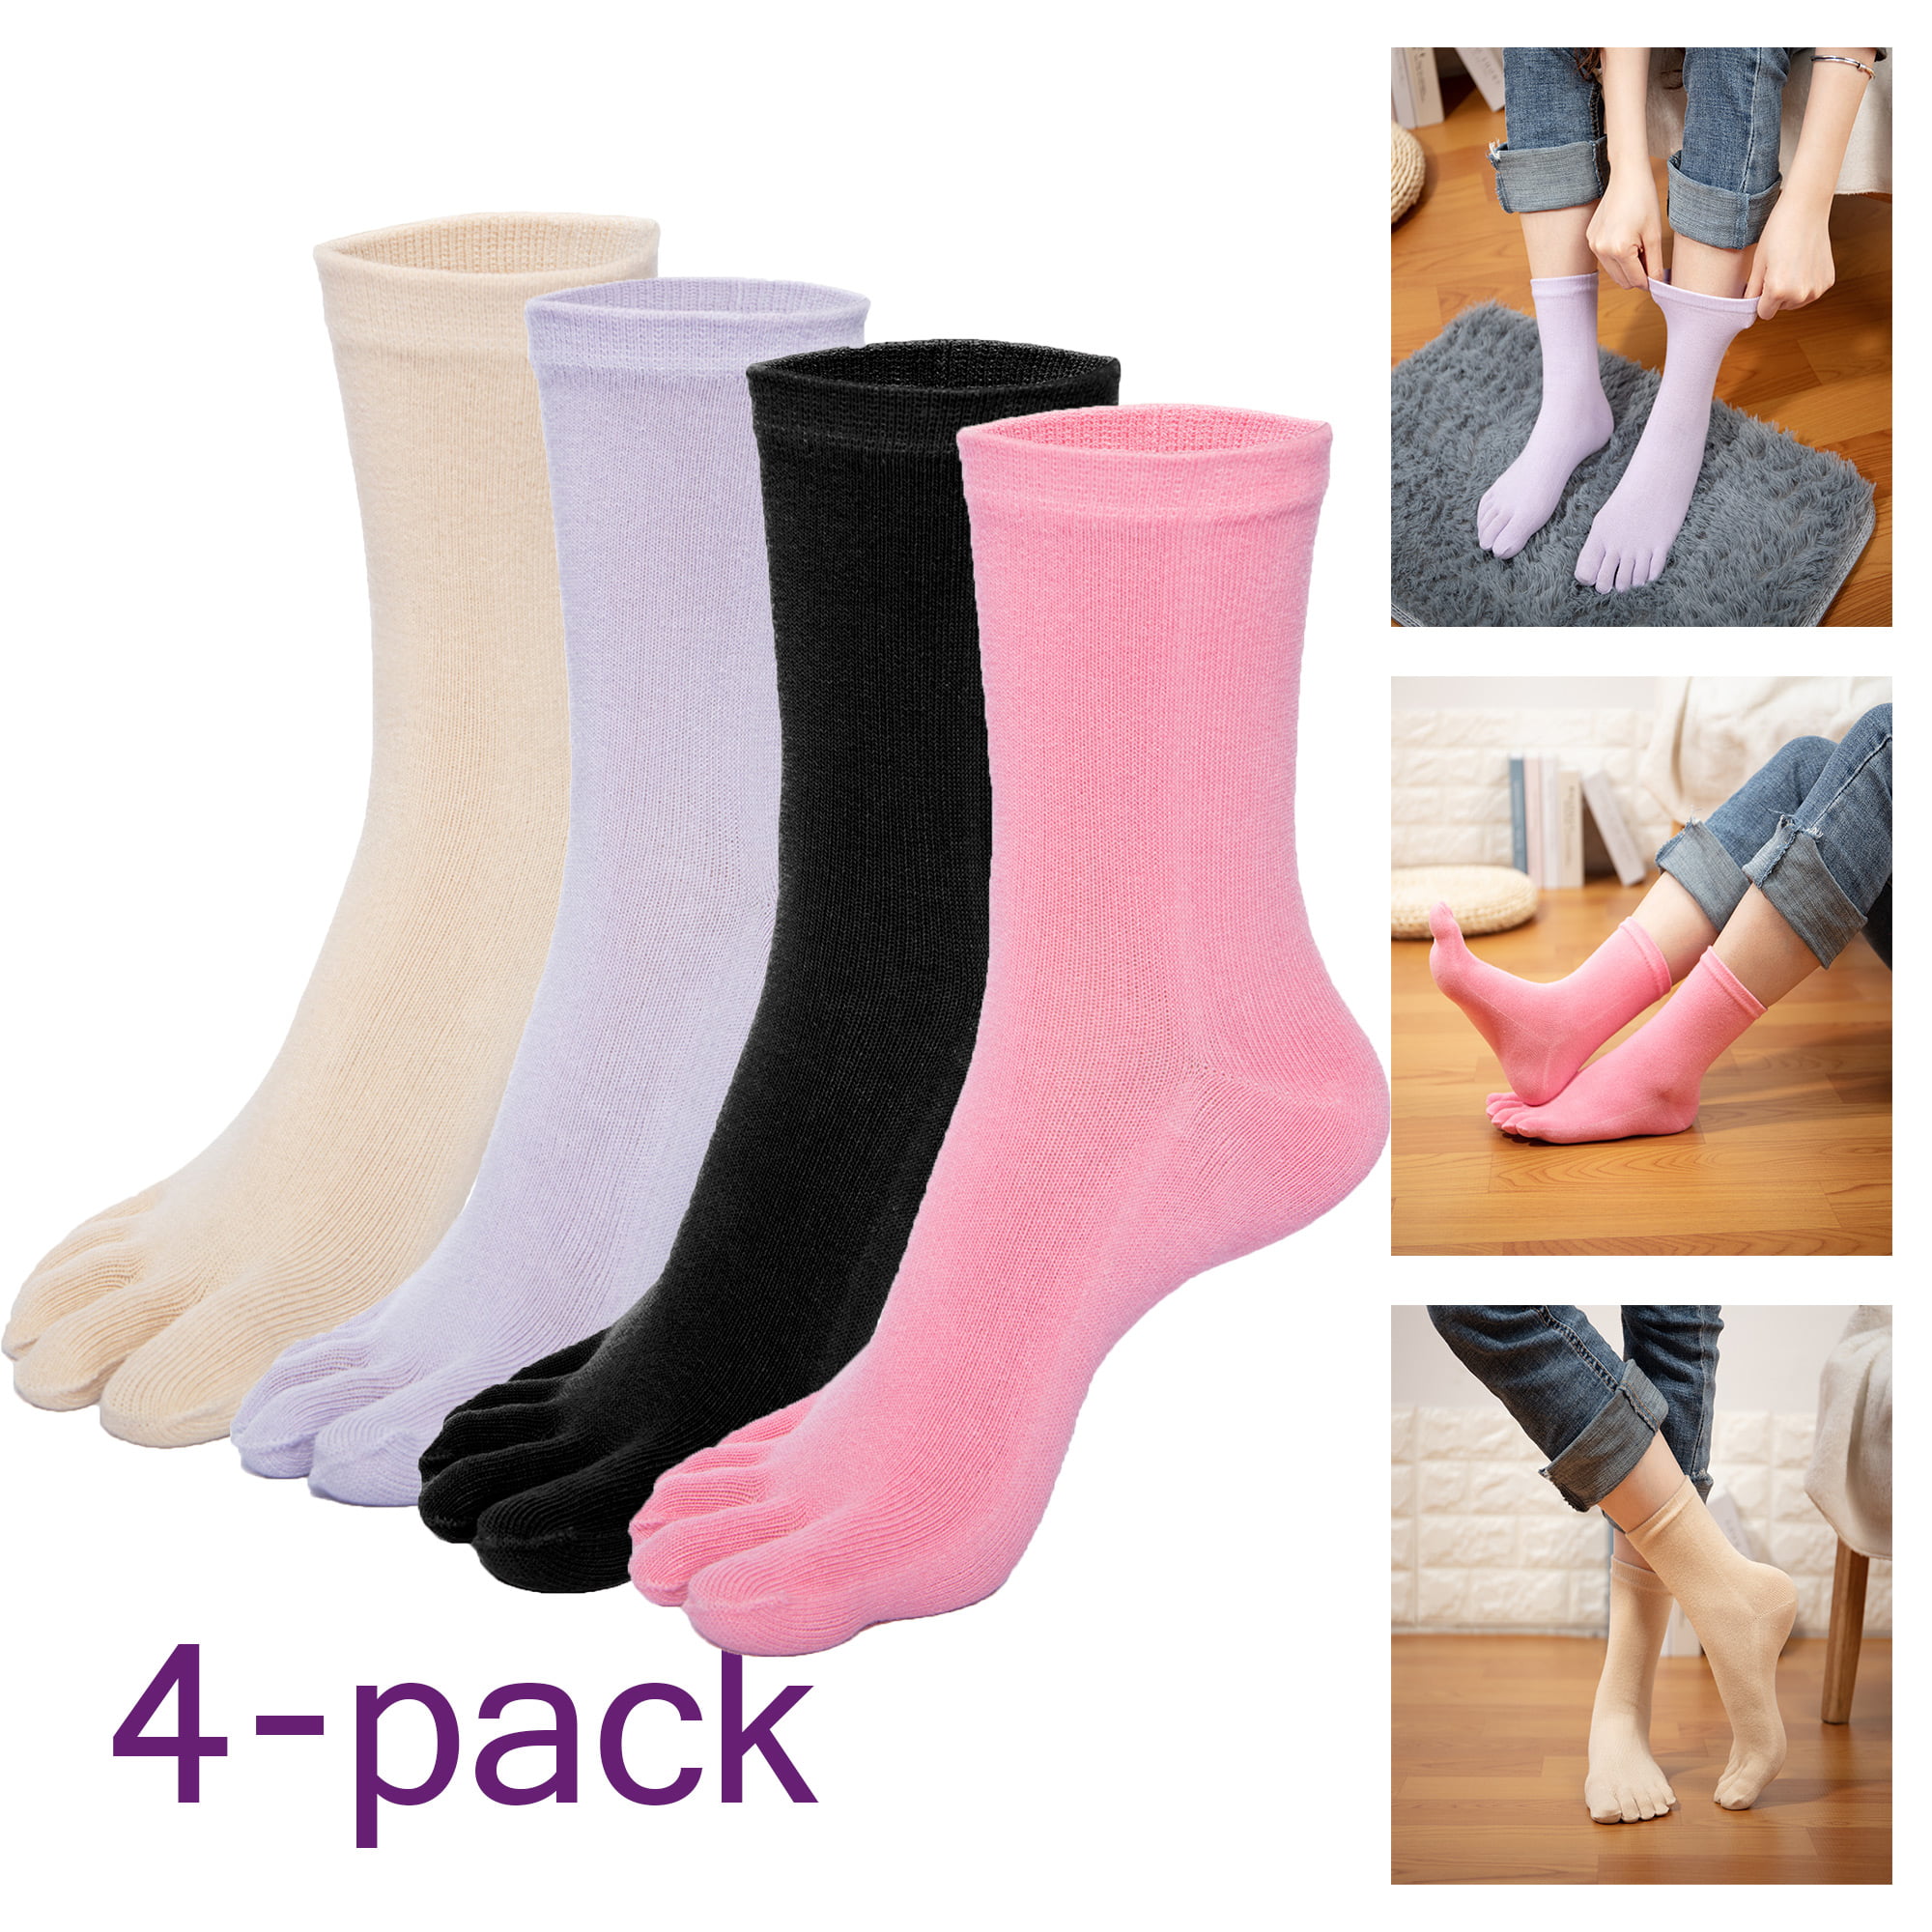 Assorted Ladies Socks Various Designs Soft High Quality Womans Size 4-7